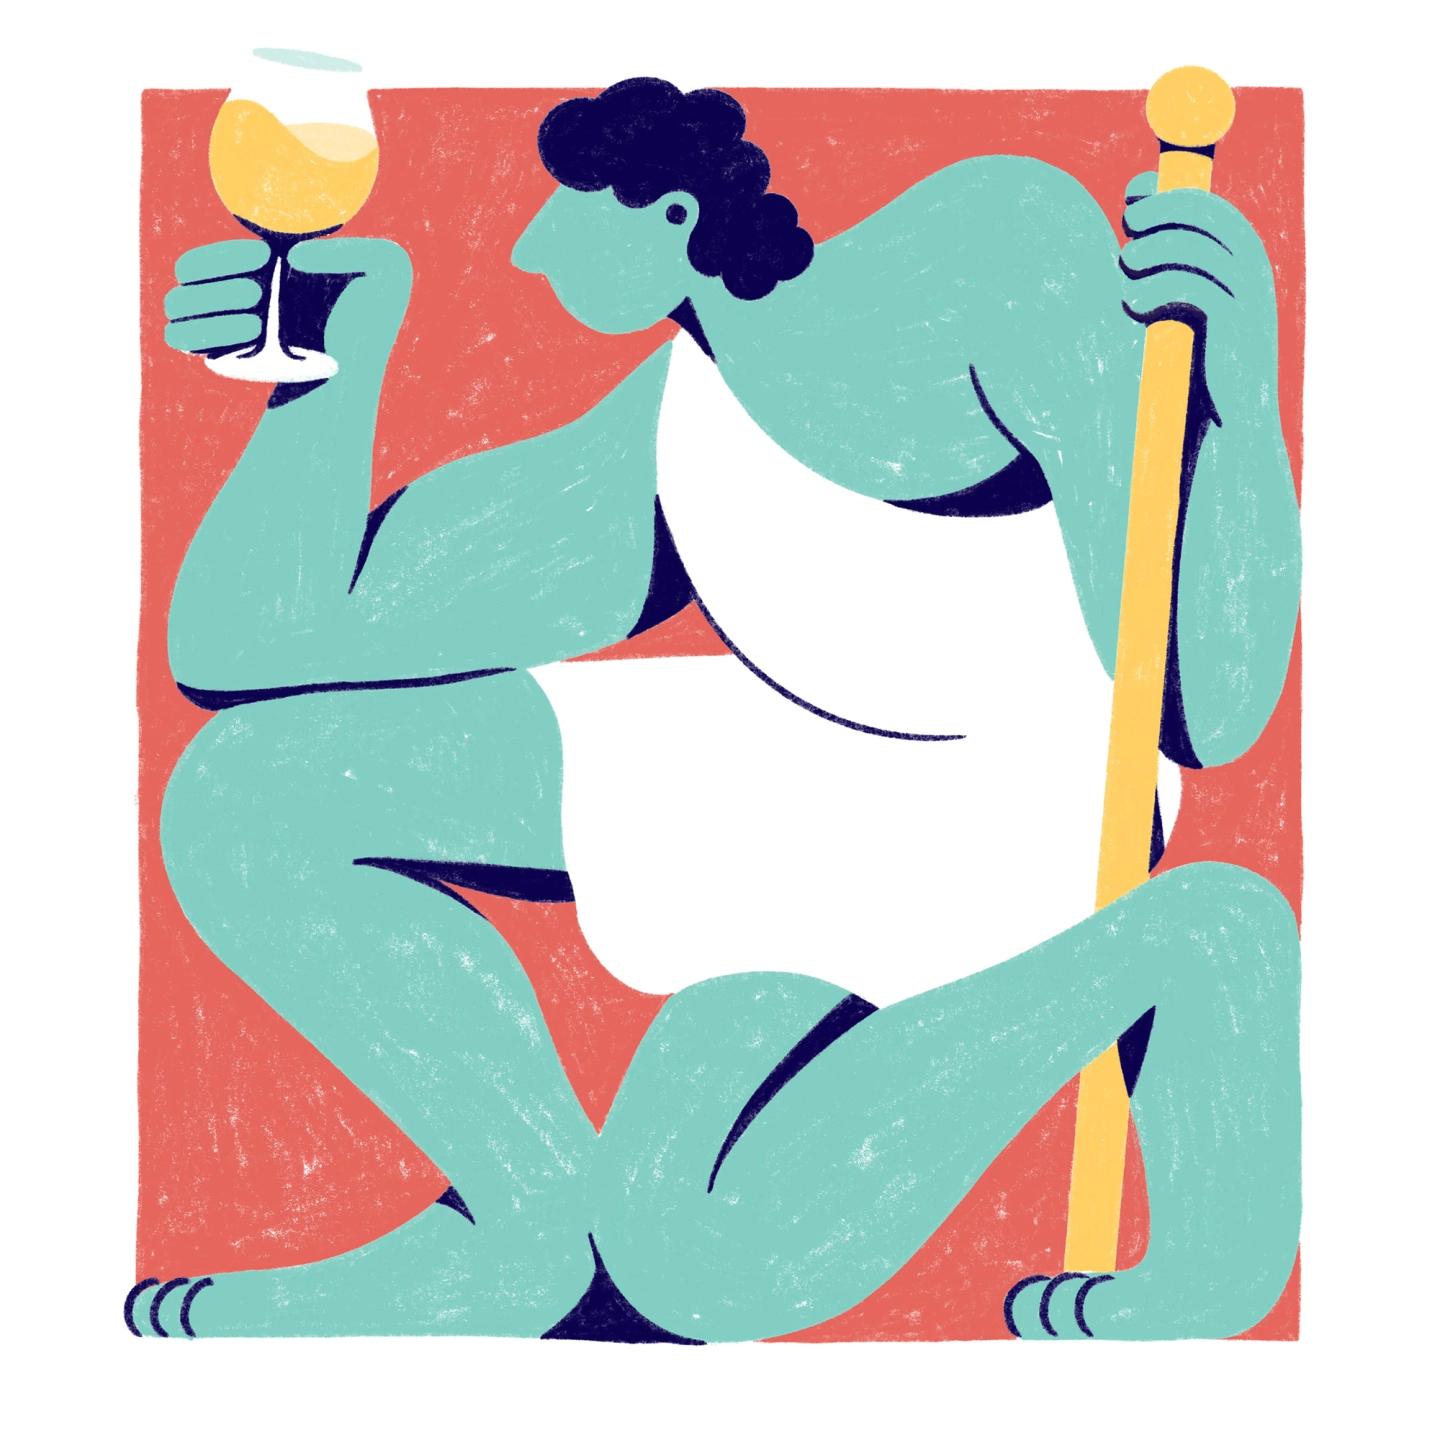 Bacchus holds his wine